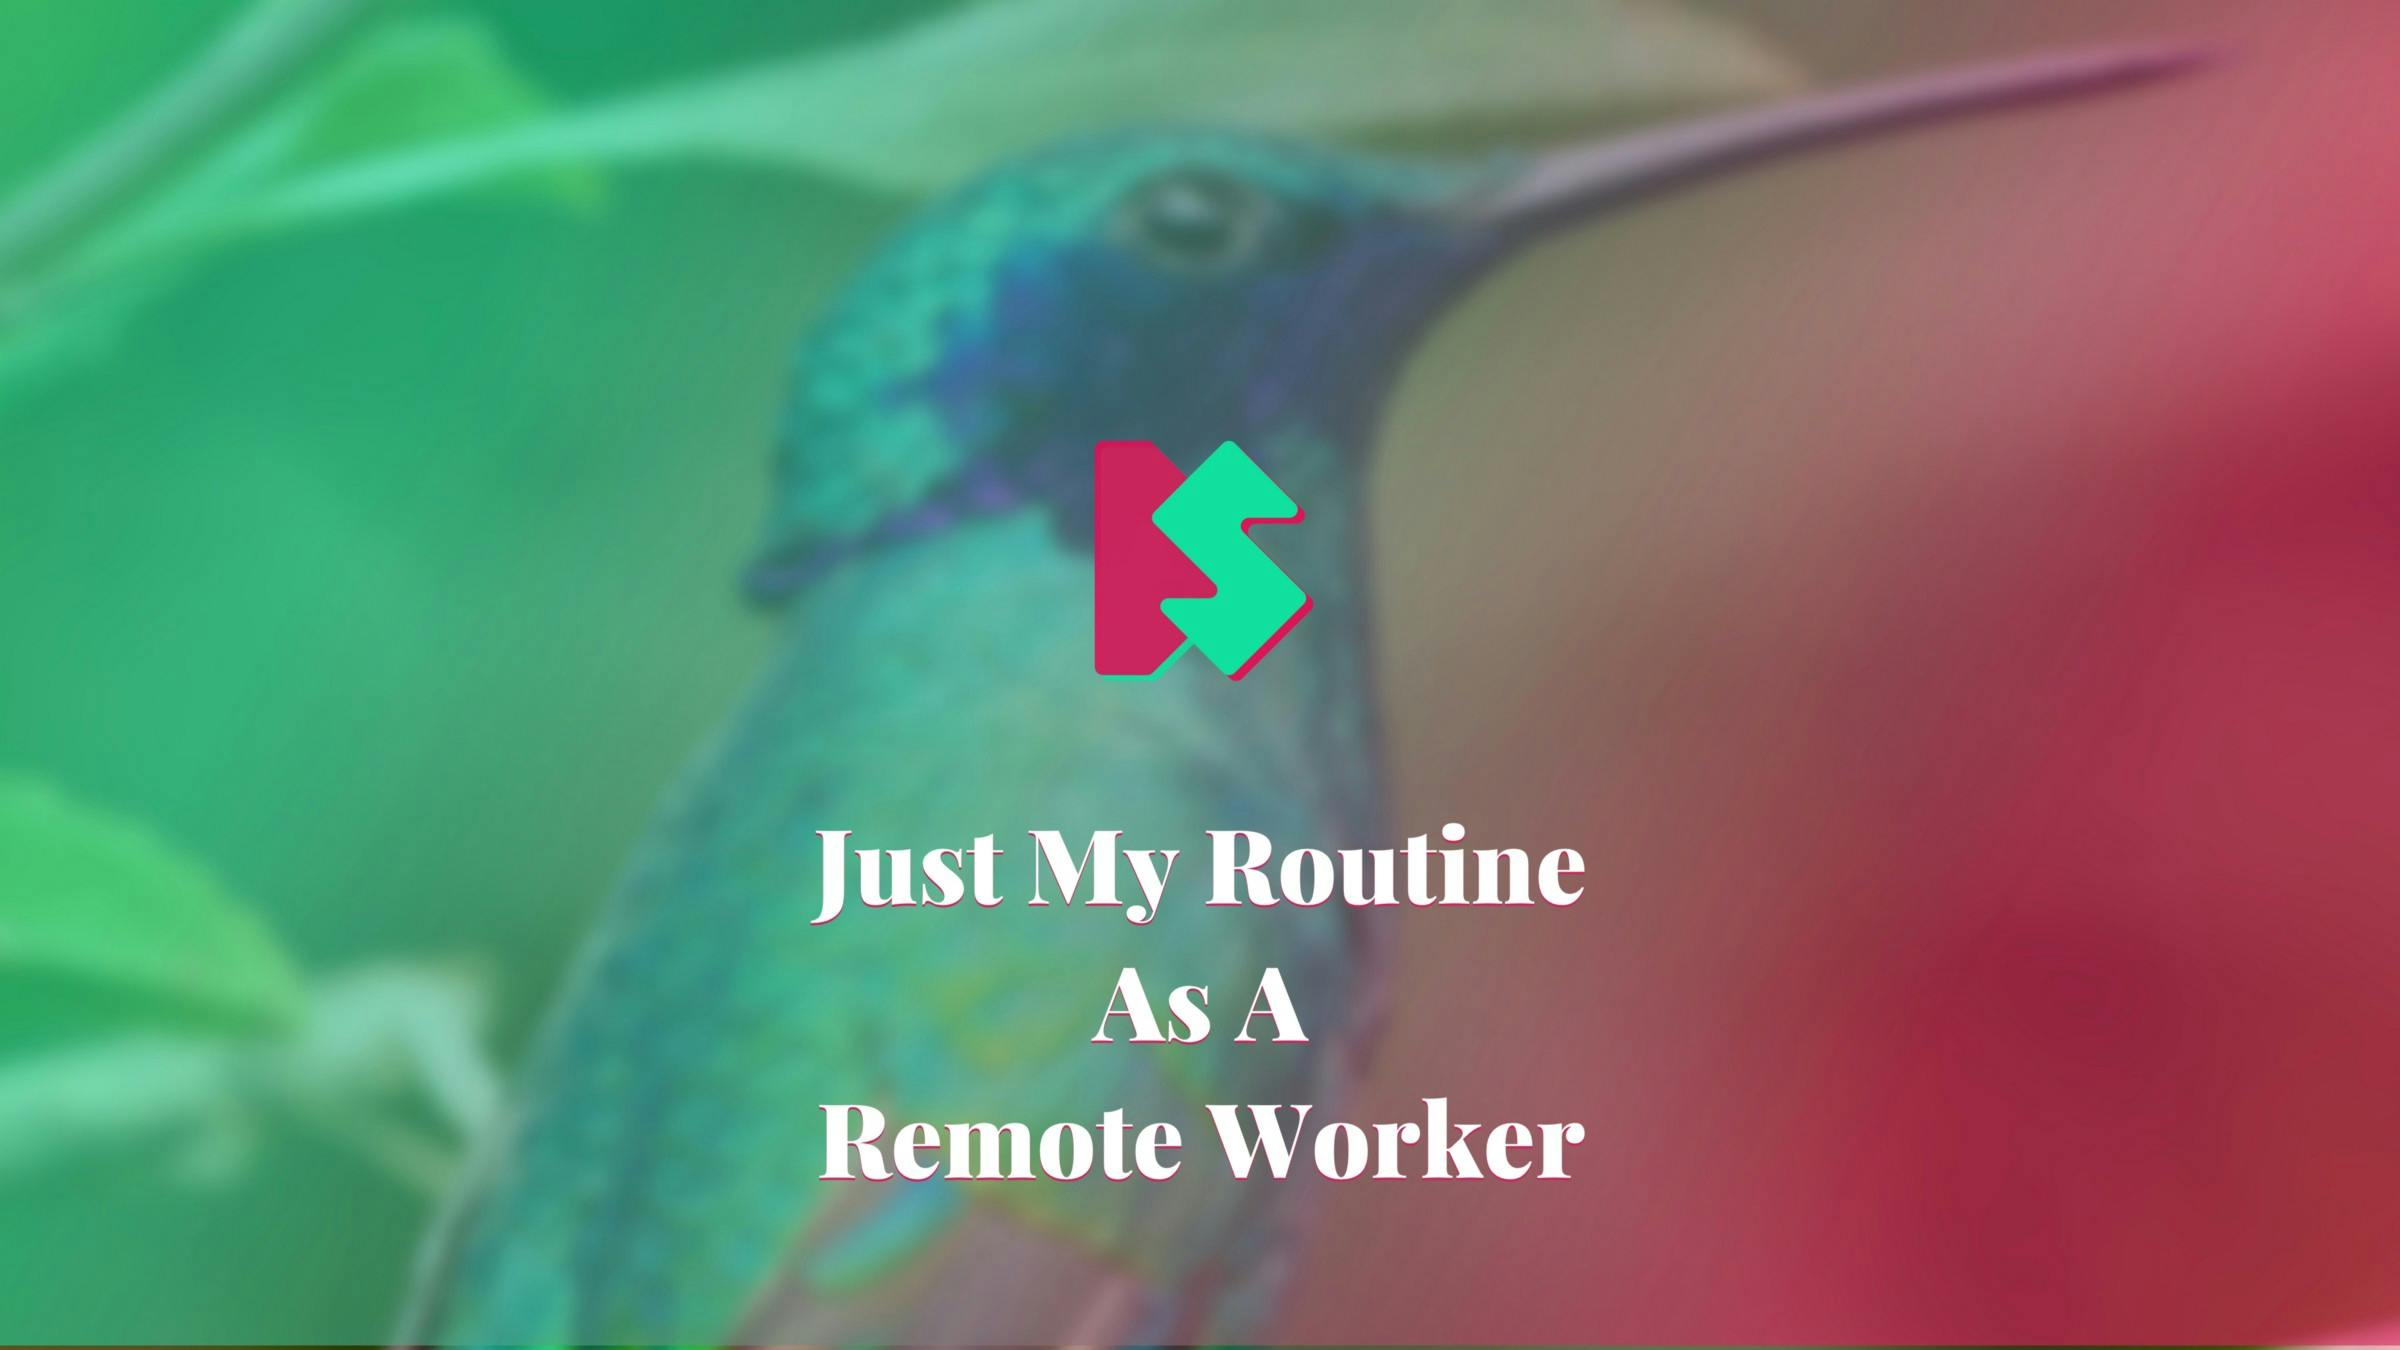 /the-typical-routine-of-this-remote-worker-3a2a25f50cc5 feature image